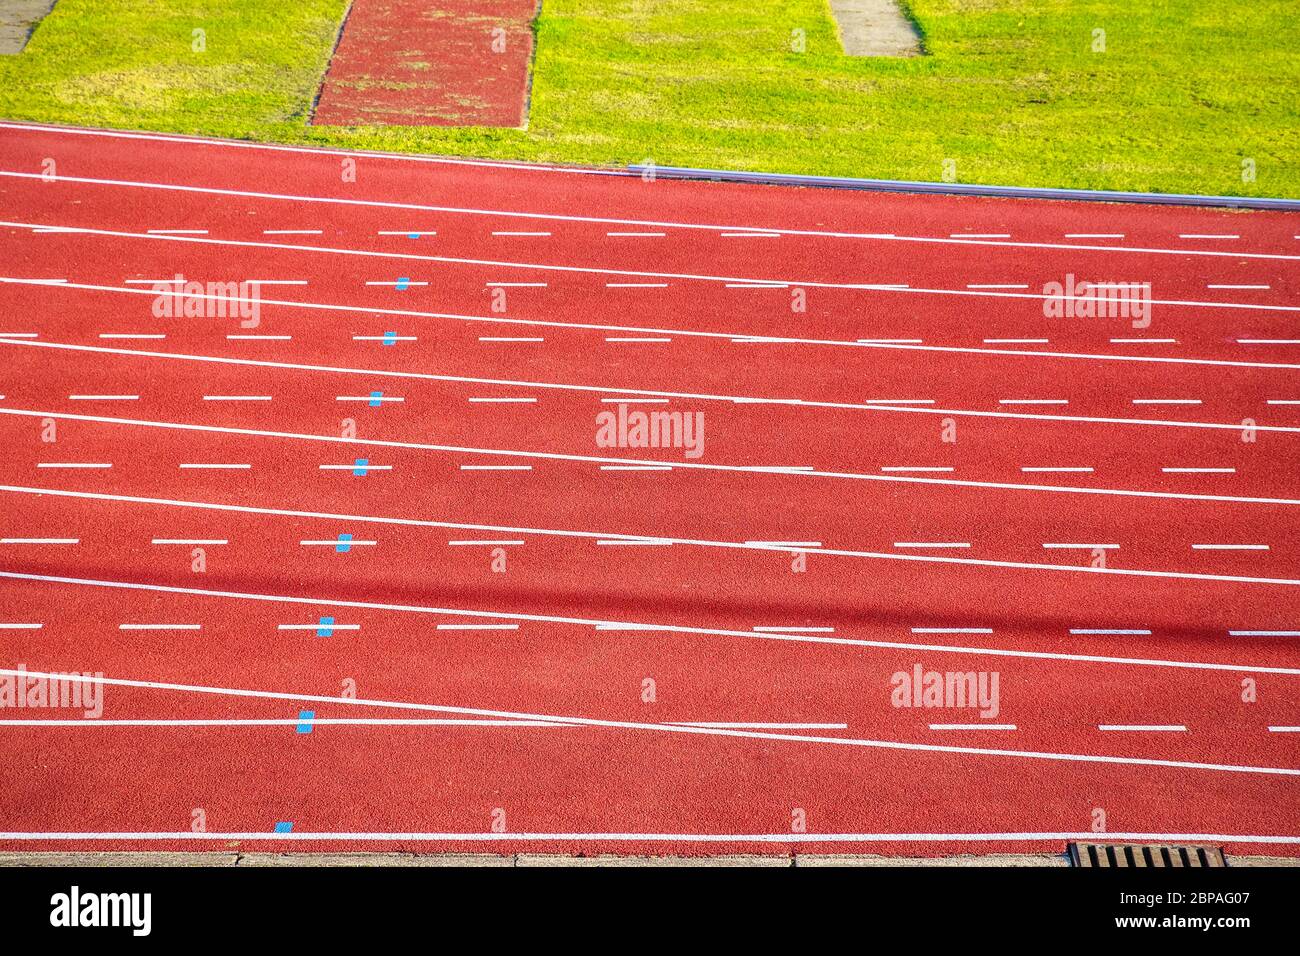 Parliament Hill Fields Athletics Track in London, all-weather running track for background use Stock Photo